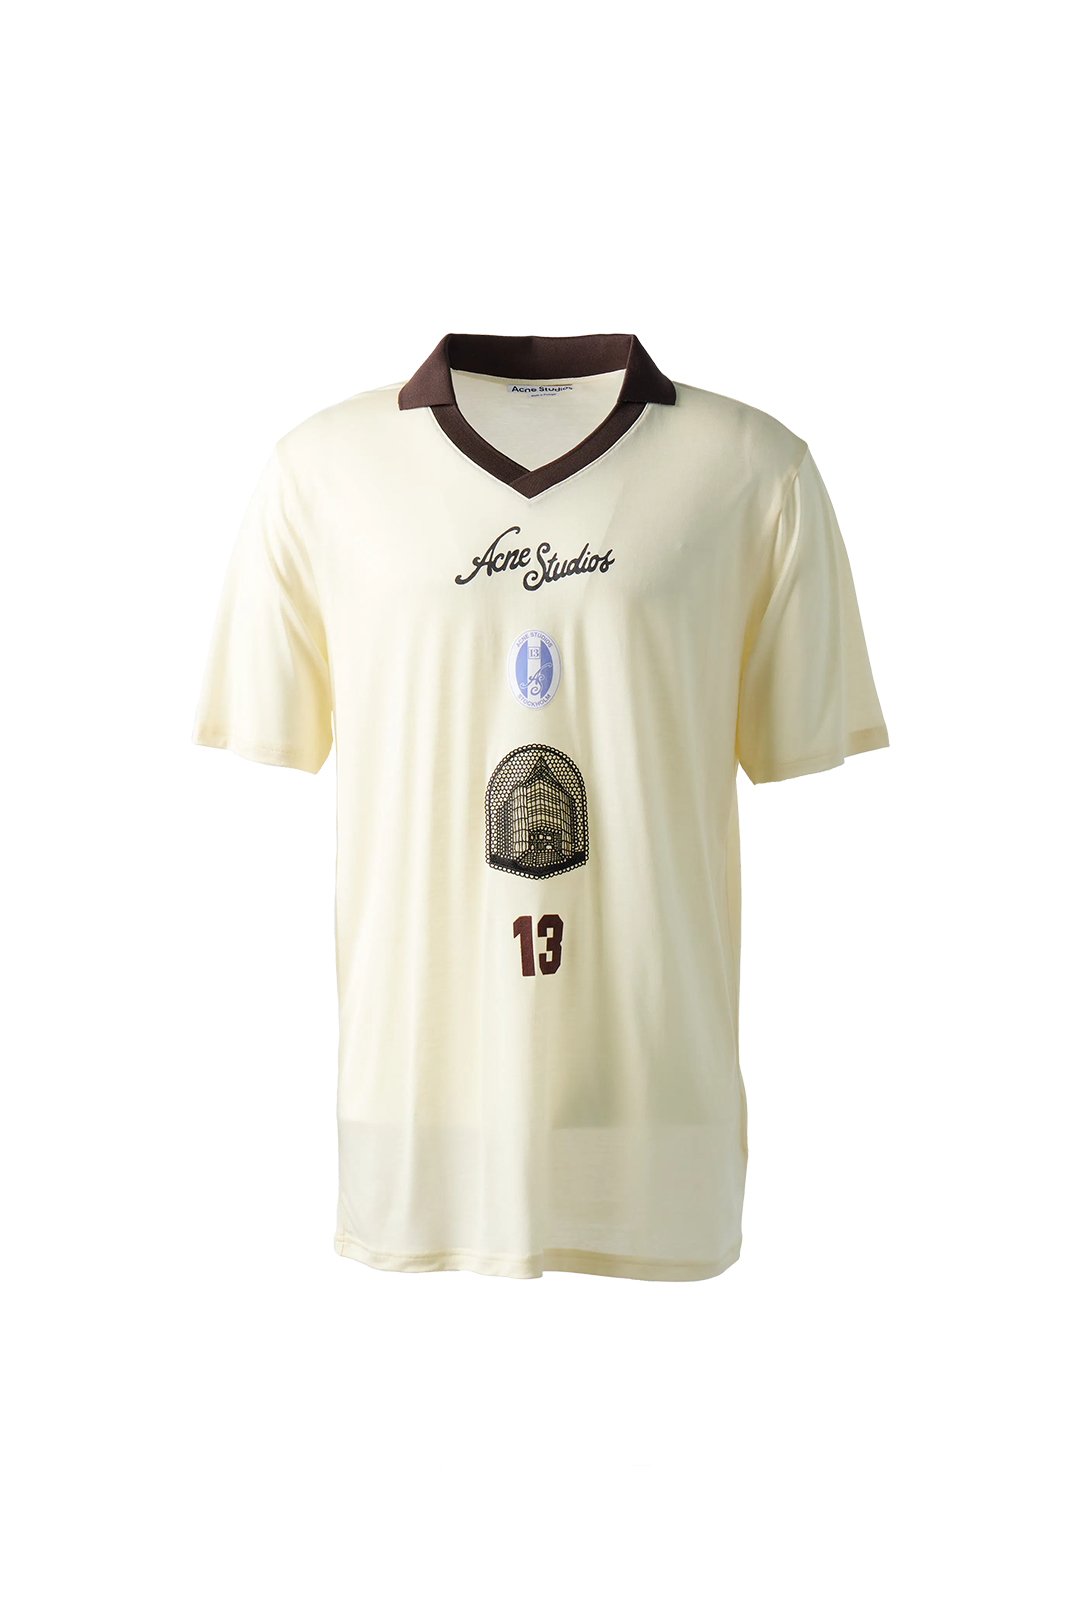 ACNE STUDIOS - S/S Football Top product image